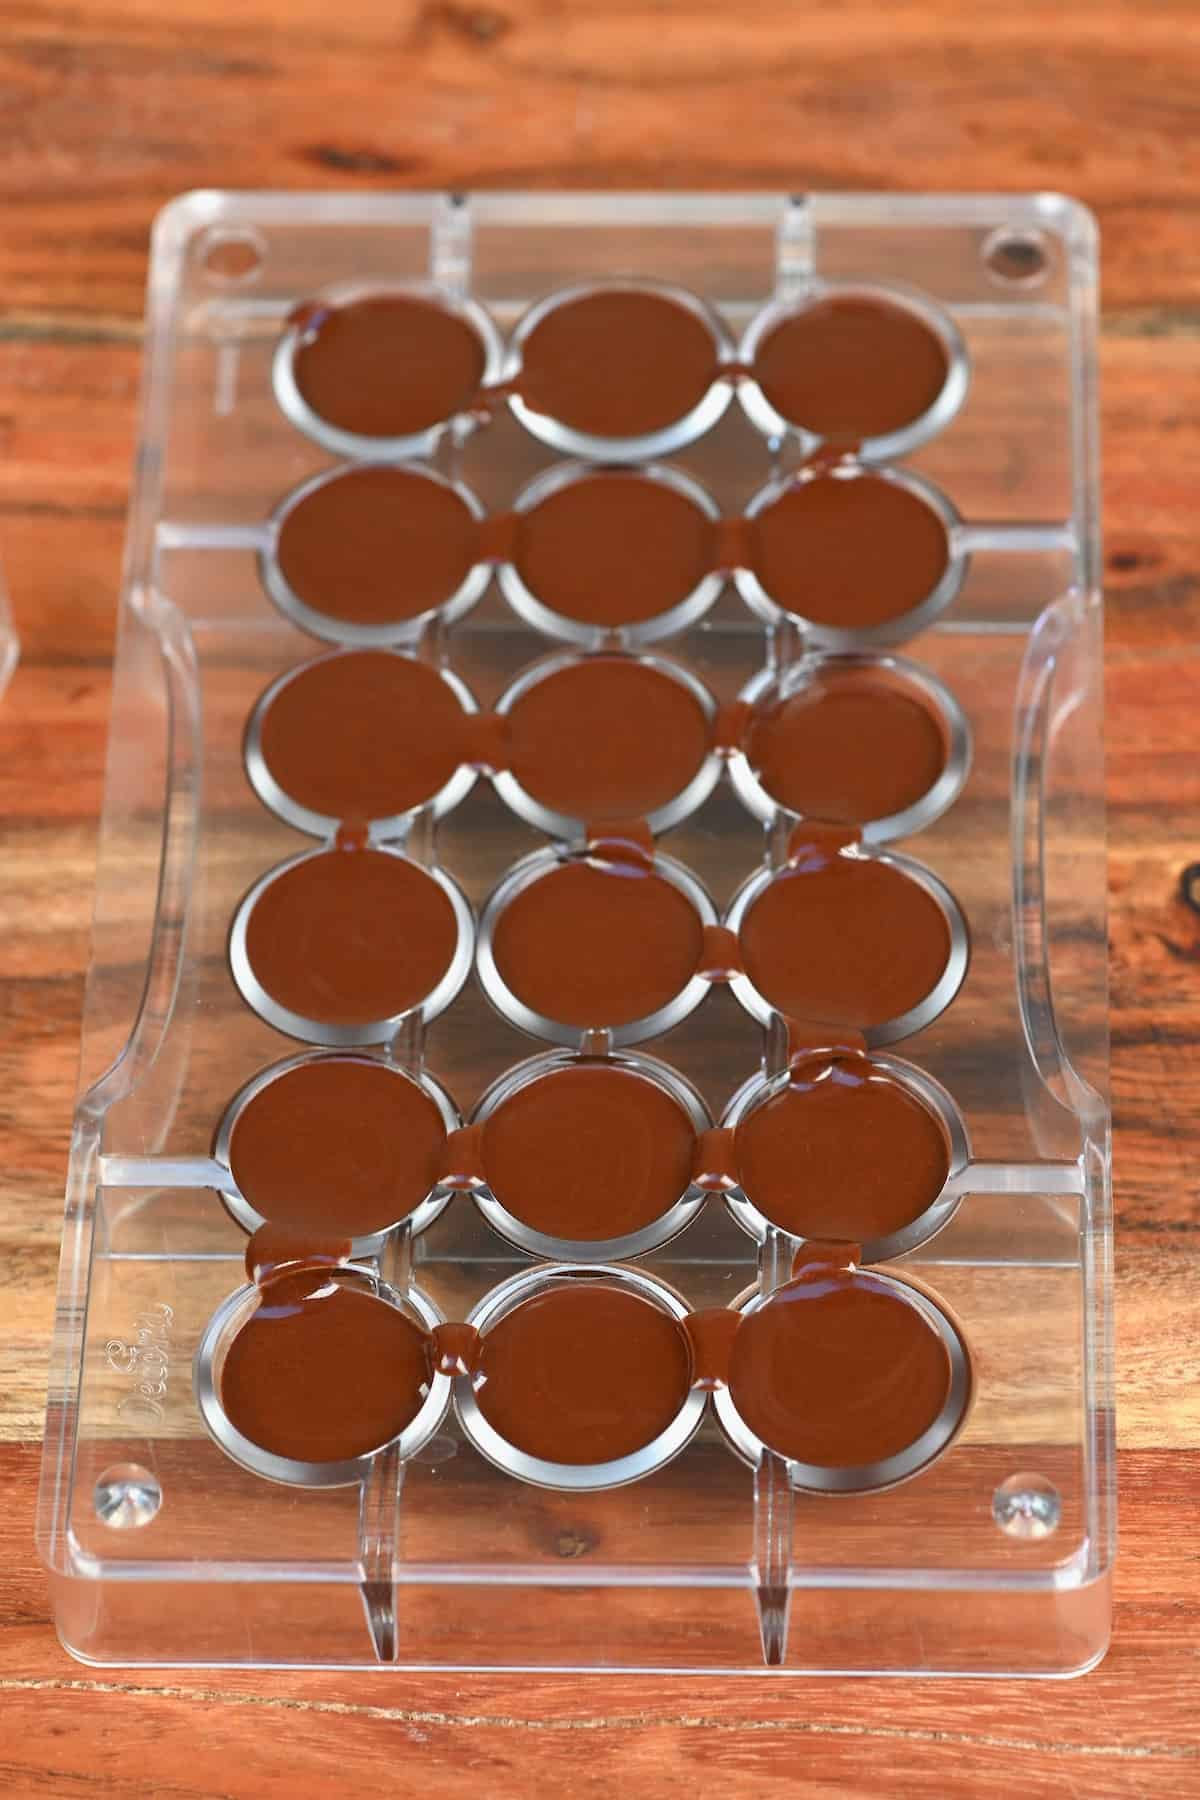 Melted chocolate poured in round molds